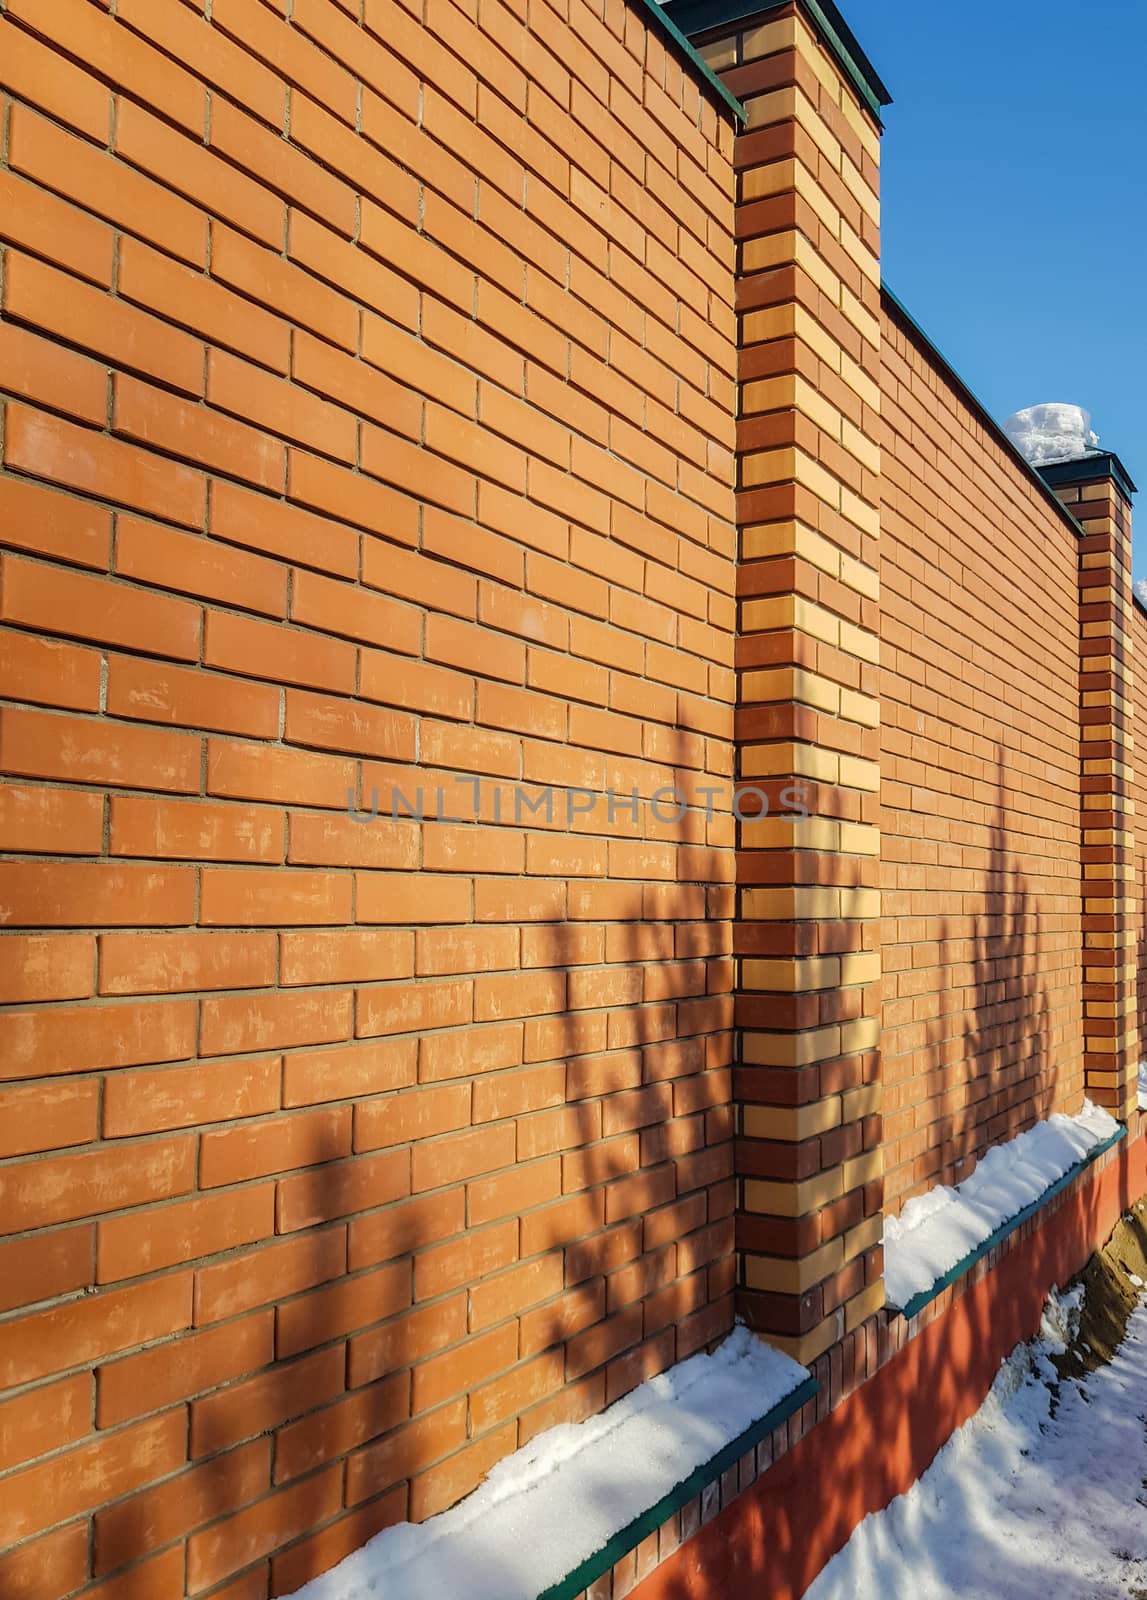 Modern red brick fence with turrets, in winter, outdoors.